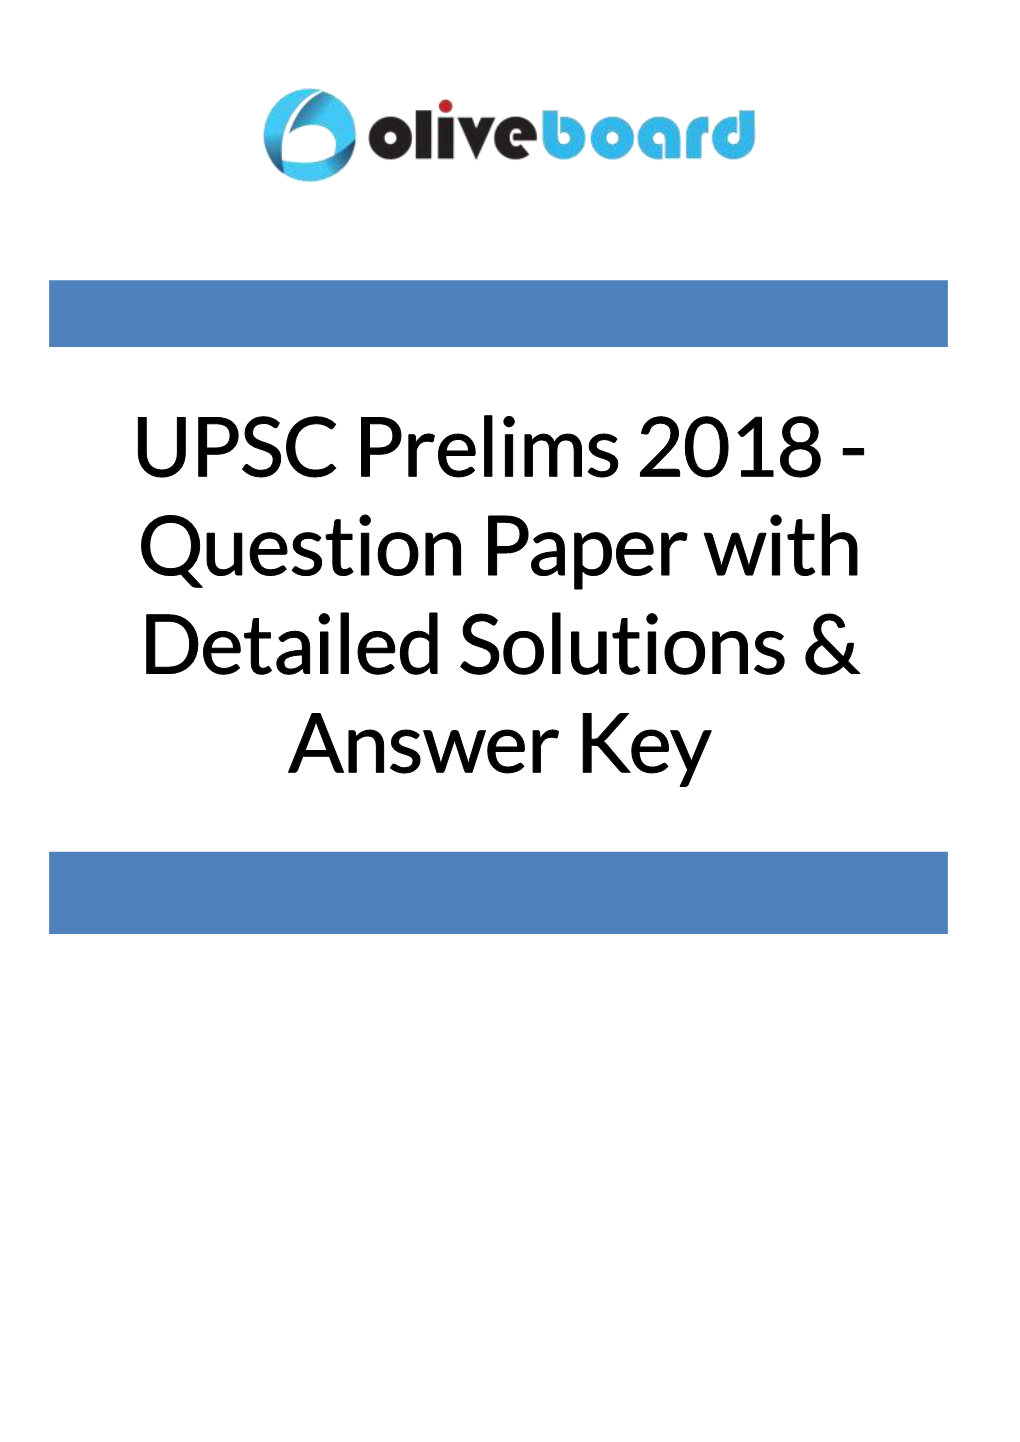 UPSC Prelims 2018 - Question Paper with Detailed Solutions & Answer Key UPSC Prelims 2018 Exam | Question Paper with Detailed Solutions – by Oliveboard